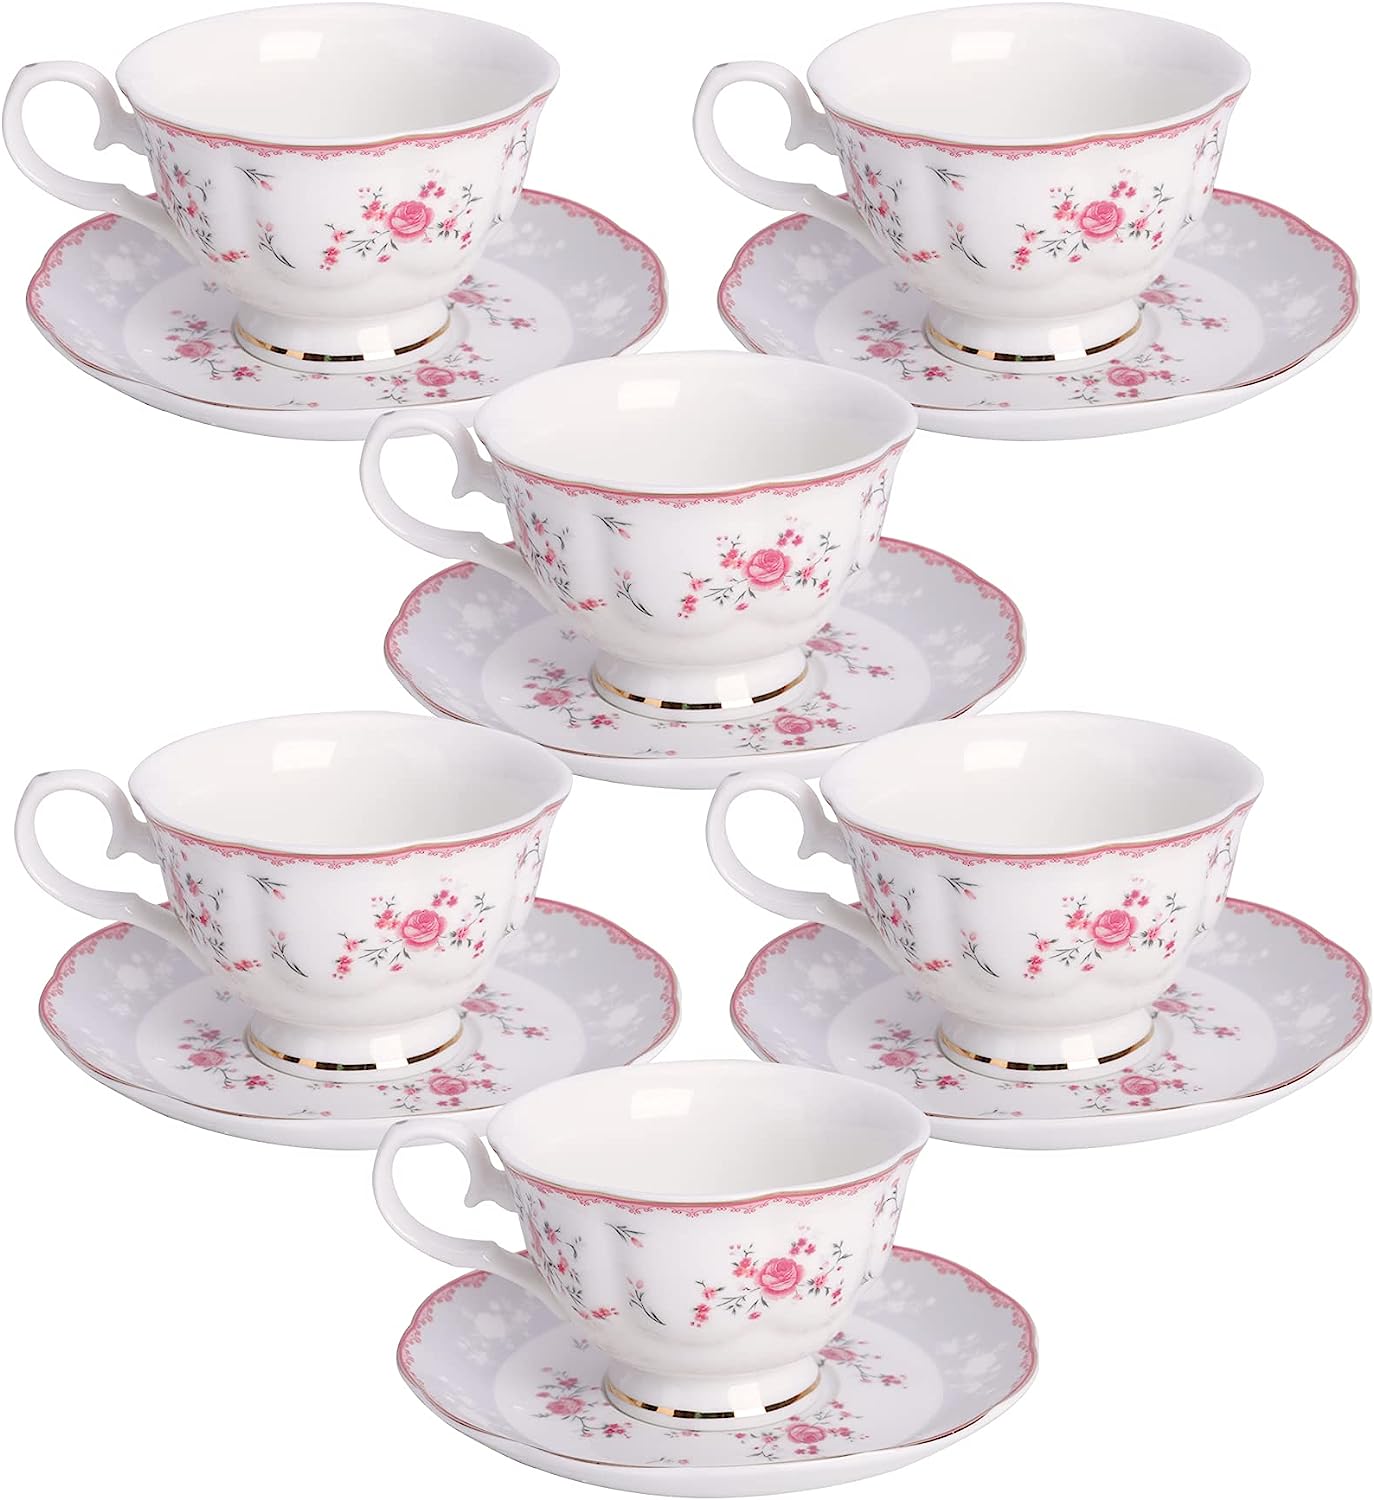 Pink Rose Flower Set of 6 Tea Cups and Saucers, Porcelain with Gold Rim, 150 ml